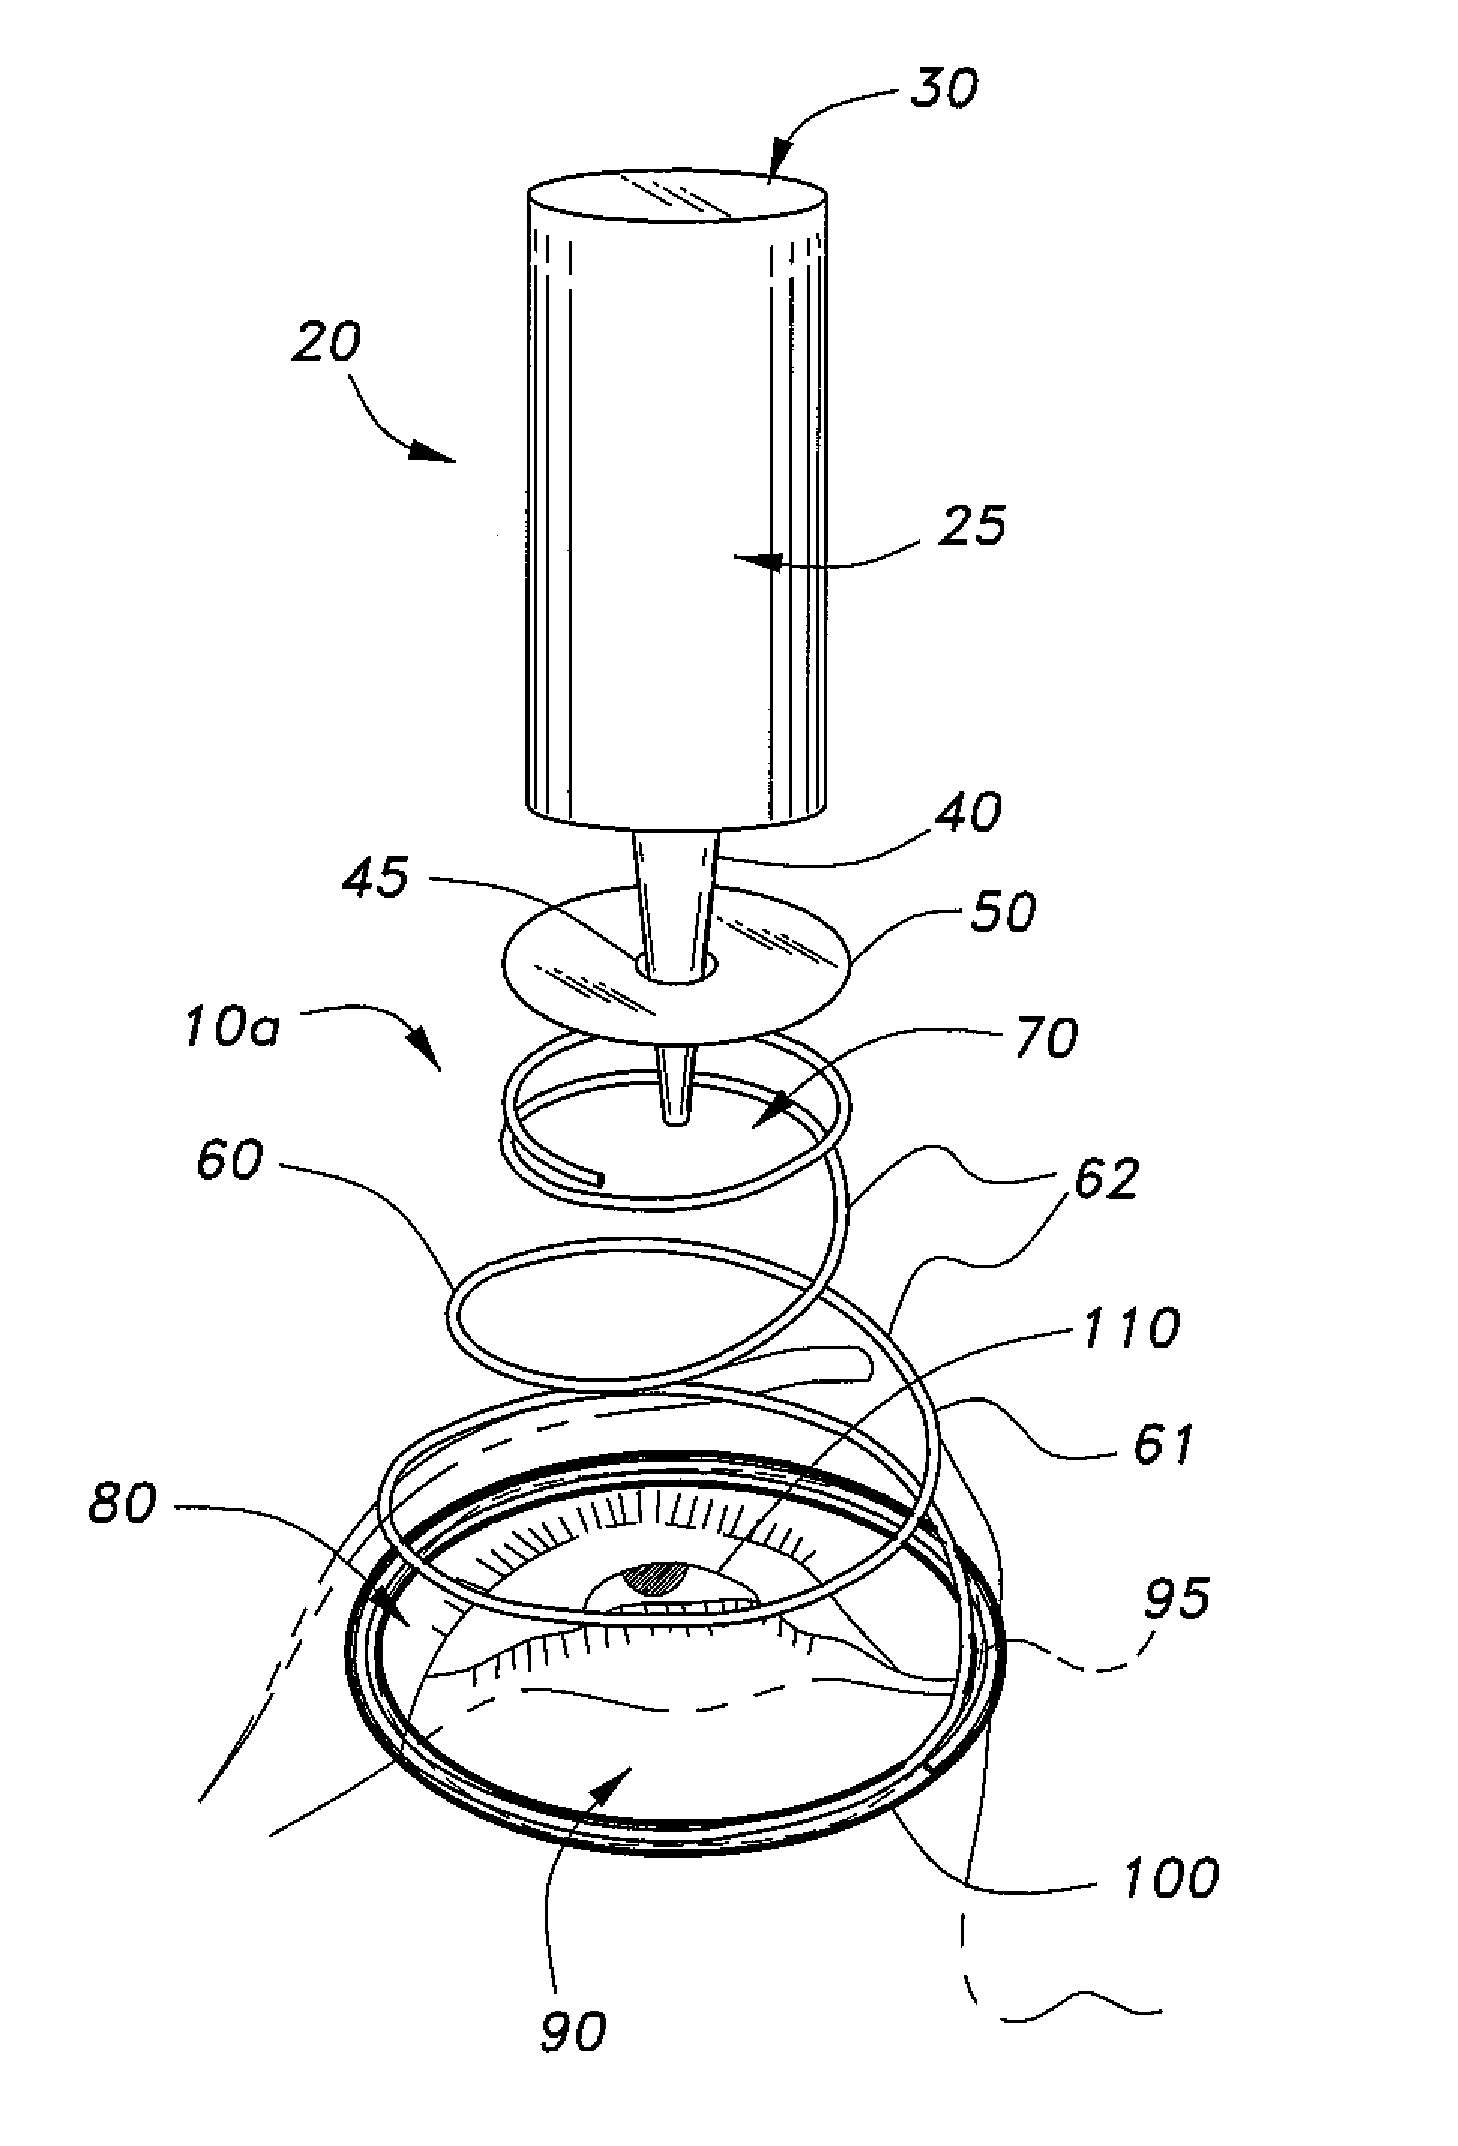 Eye dropper positioning and guiding apparatus